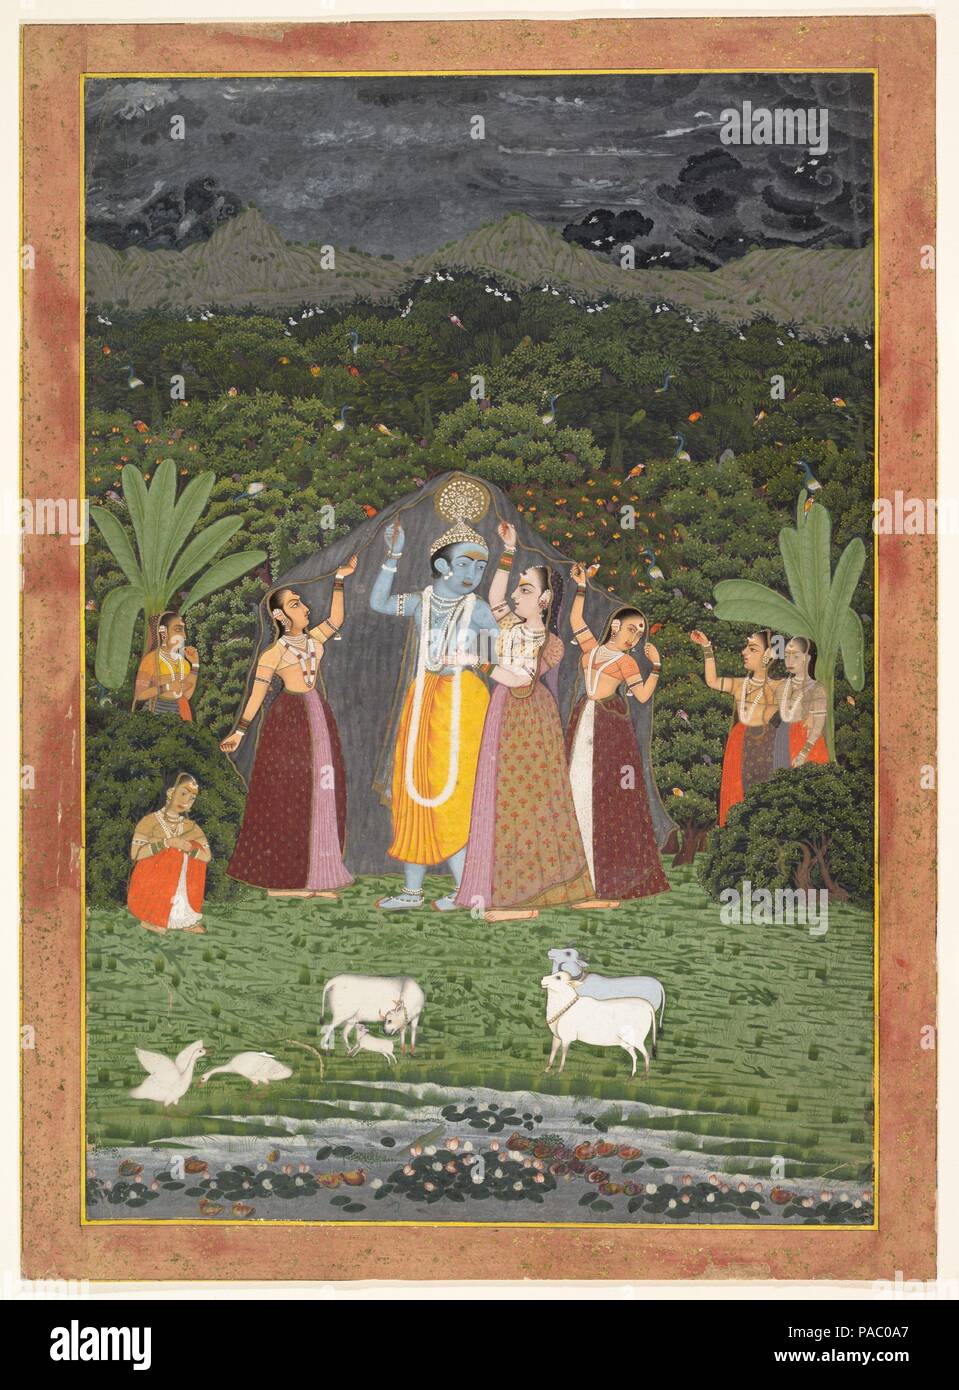 Krishna and the Gopis Take Shelter from the Rain. Culture: India (Rajasthan, Jaipur). Dimensions: 13 3/4 x 9 3/8 in. (34.9 x 23.8 cm). Date: 1760.  Here, dark clouds fill the sky and Krishna shelters several gopis (cow maids), alluding to his lifting of Mount Govardhana to shield the inhabitants of the village of Braj from a devastating storm sent by the god Indra. The gopis' devotion (bhakti) to Krishna is mimicked by the cows who share in their adoration. Krishna's pastoral activity, which was mapped for places of pilgrimage, and his erotically charged relationship with the gopis, which spea Stock Photo